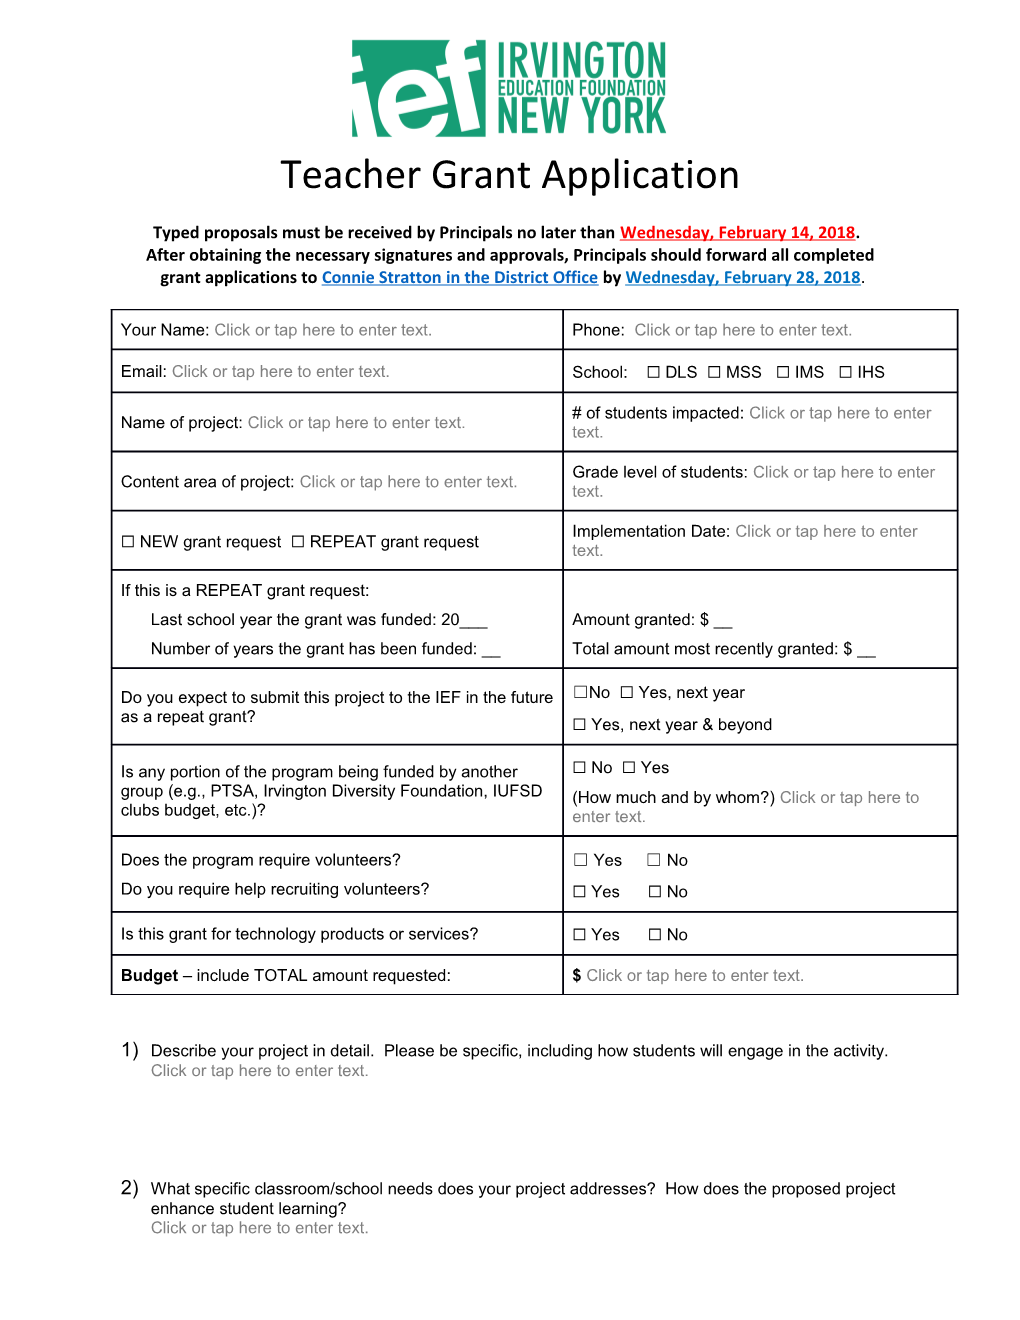 IEF Teacher Grant Application Page 1 of 4